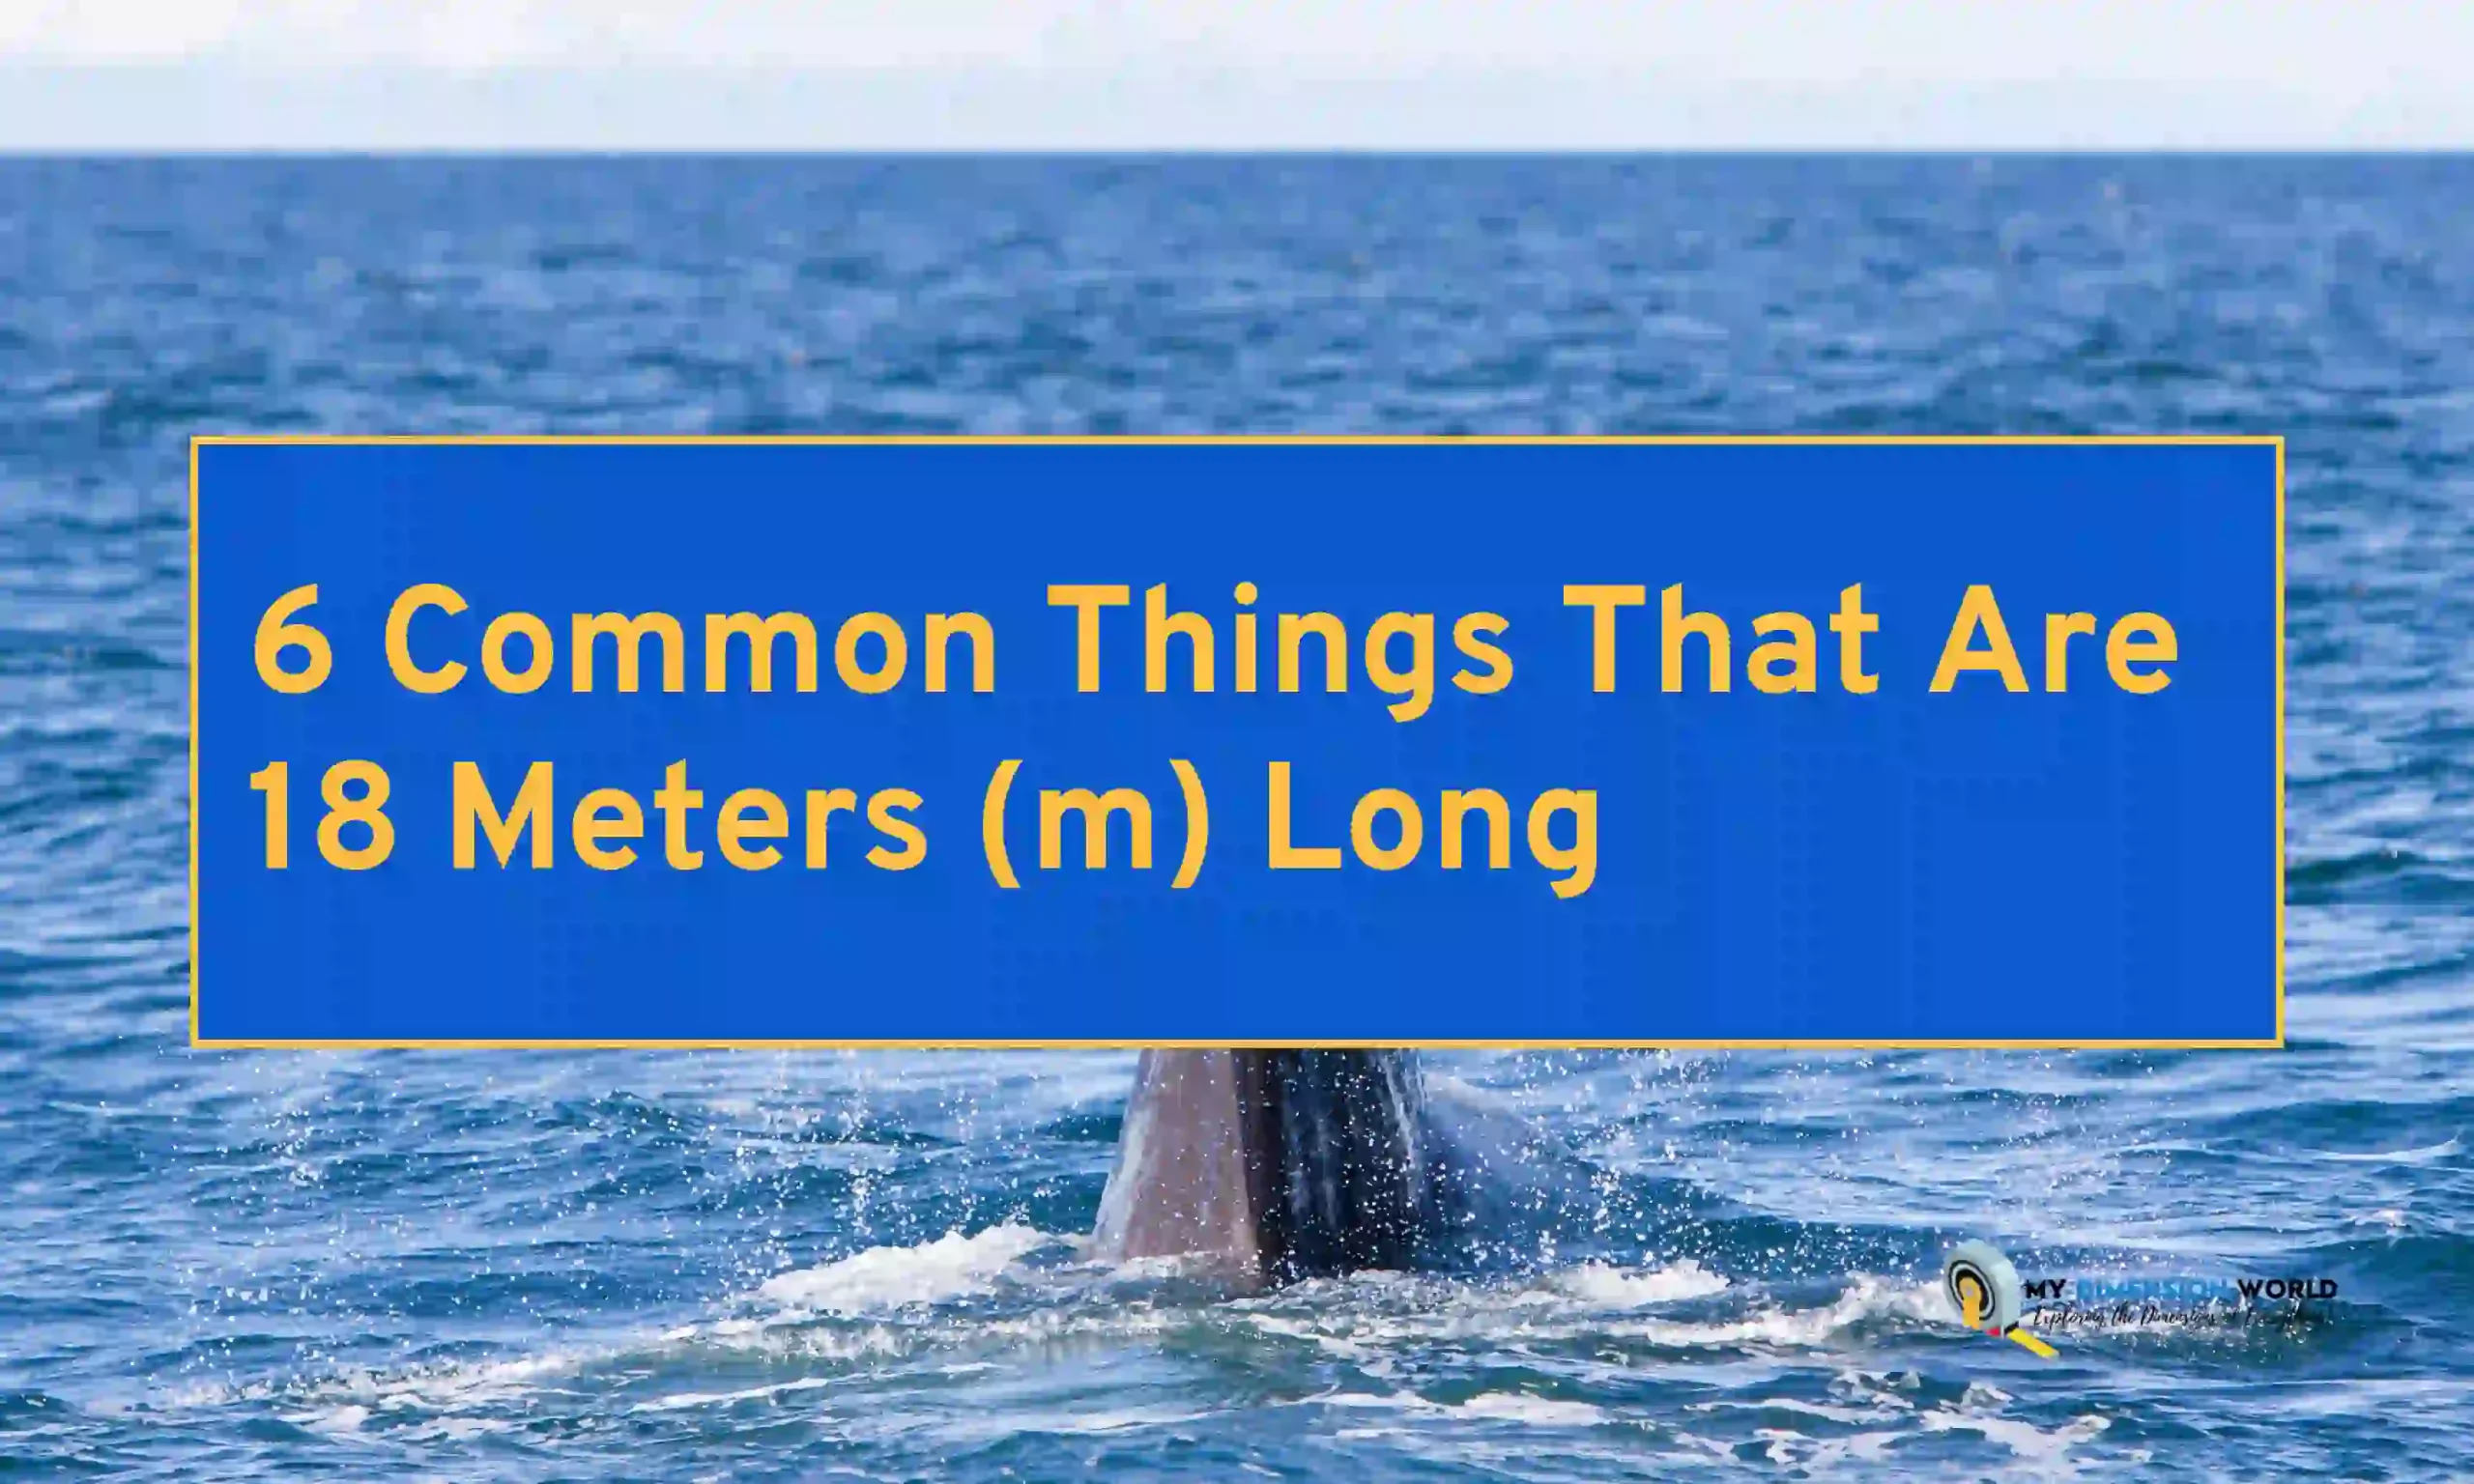 6 Common Things That Are 18 Meters (m) Long